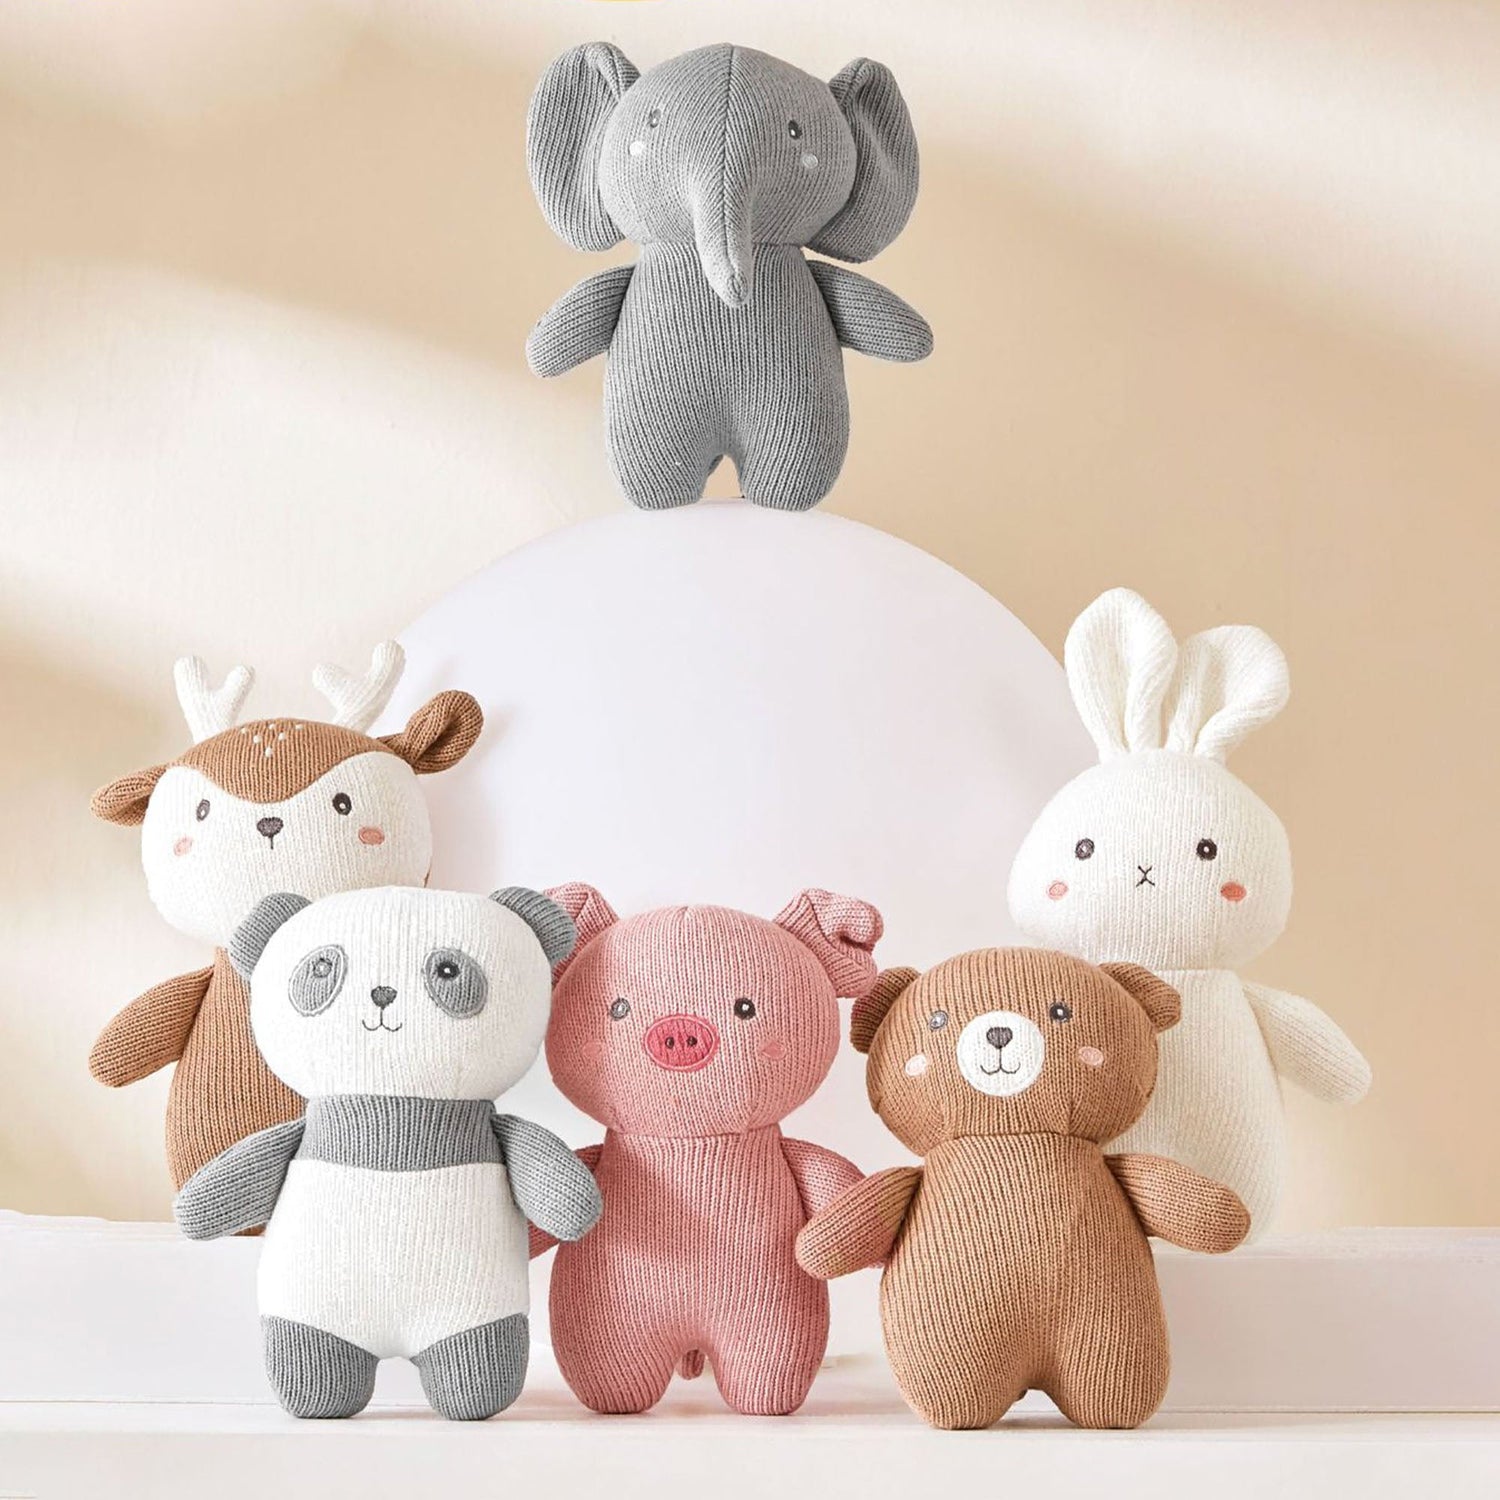 A group of stuffed animals are crowded together on a wooden shelf. The stuffed animals include a rabbit, a bear, a deer, an elephant, and a pig. They are all different colors and sizes.